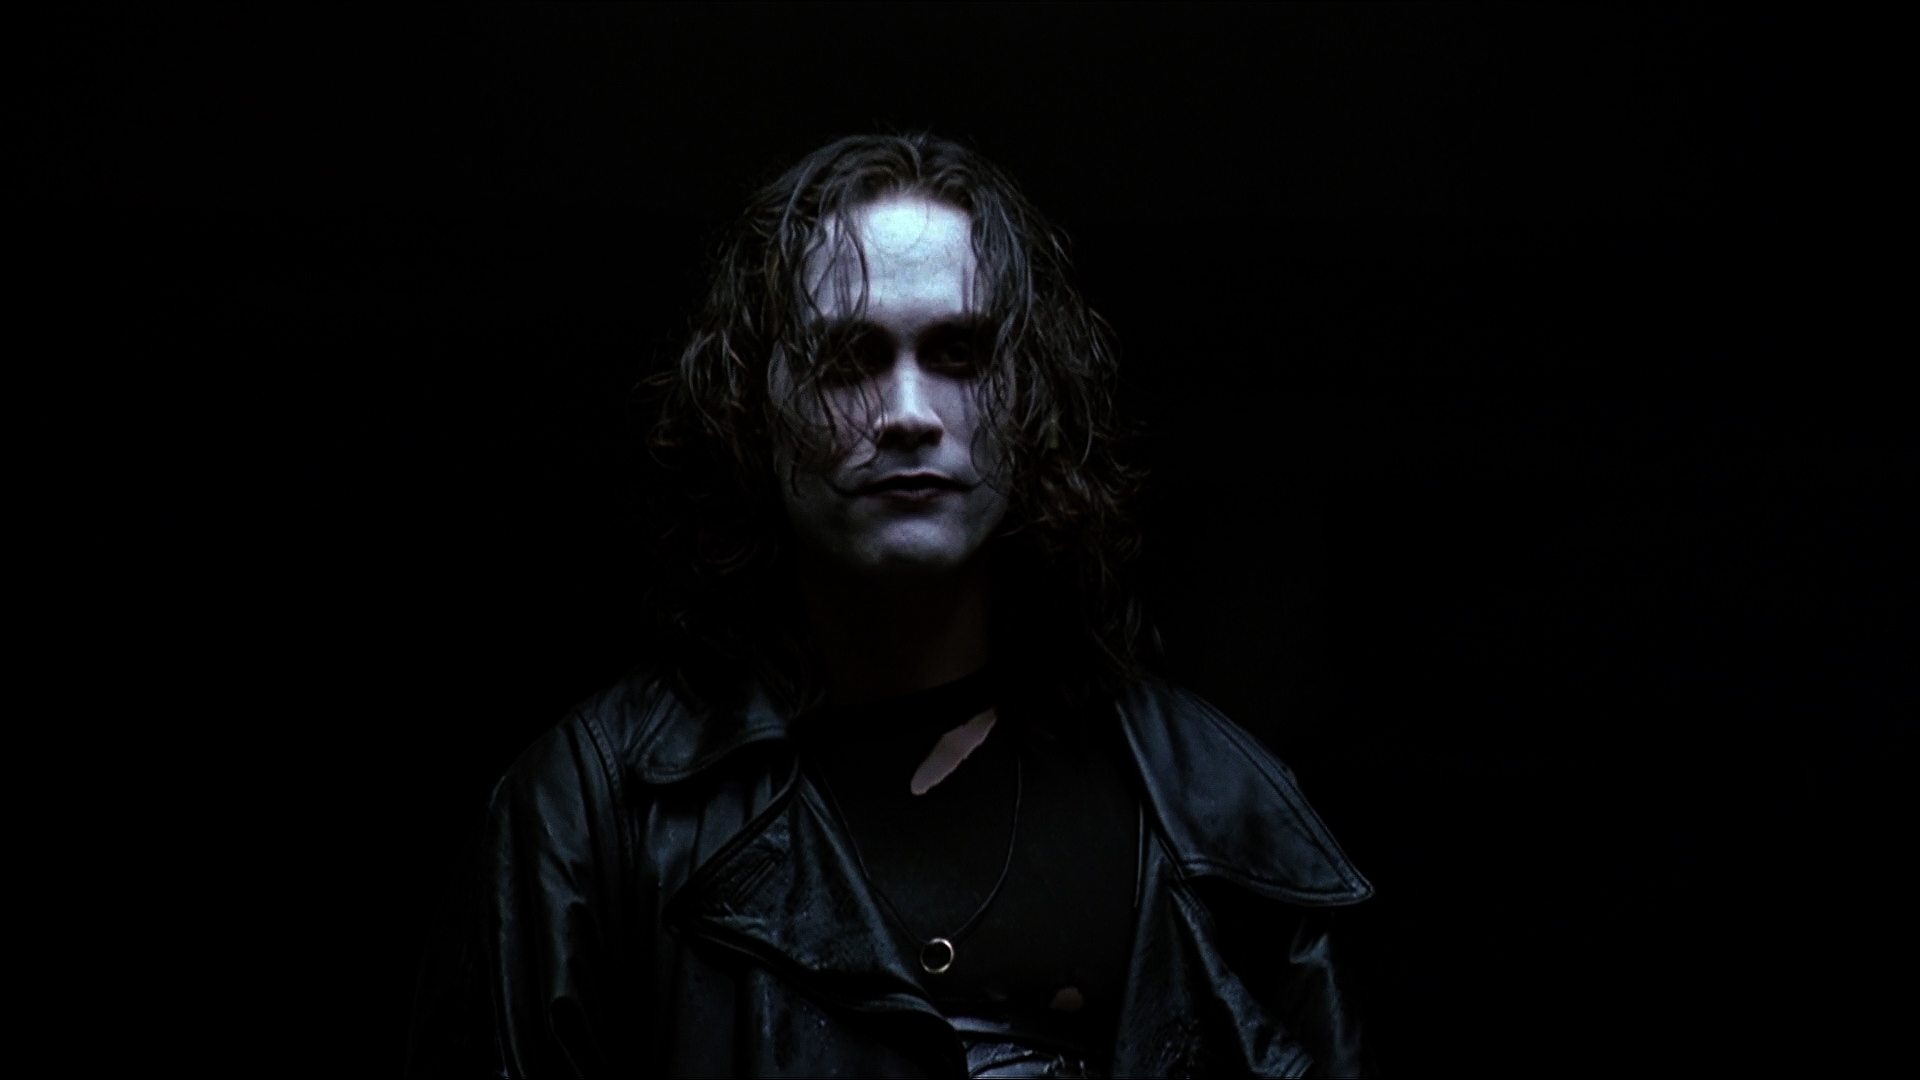 the crow full movie online free